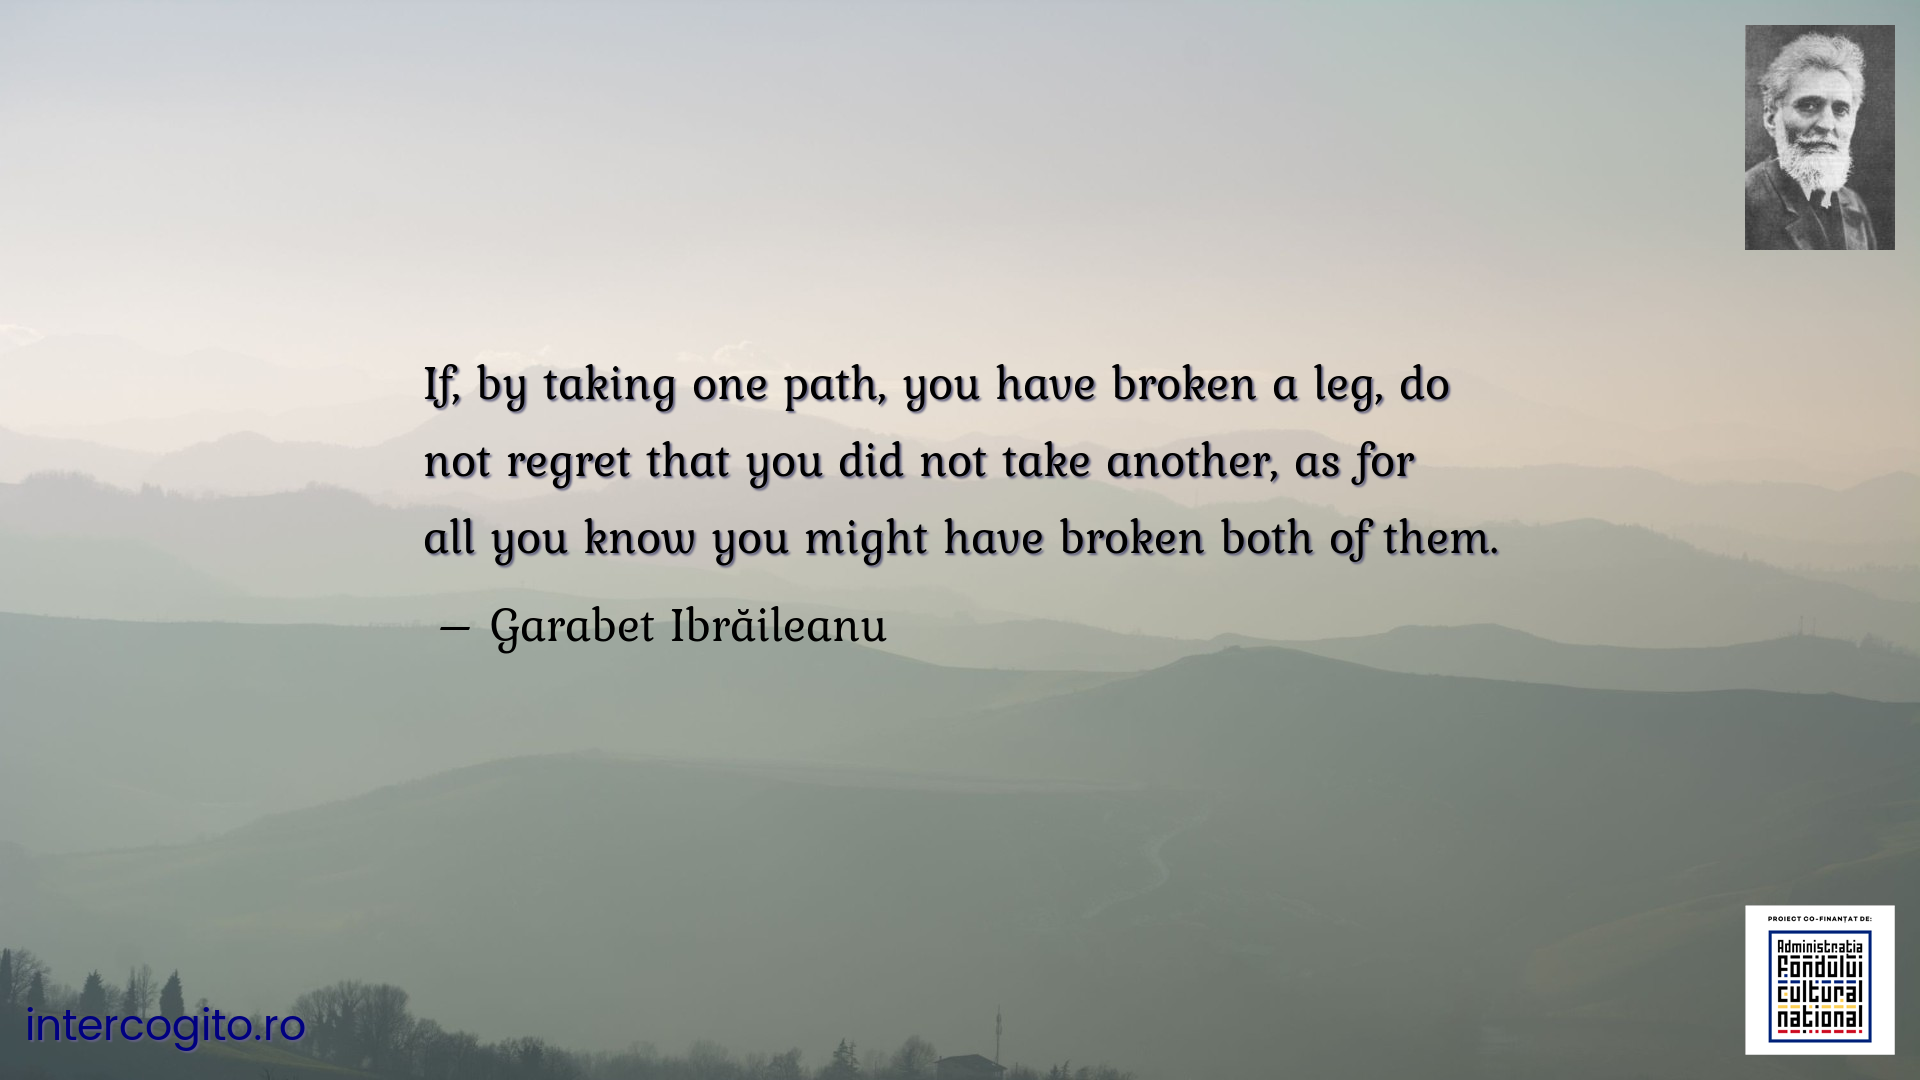 If, by taking one path, you have broken a leg, do not regret that you did not take another, as for all you know you might have broken both of them.